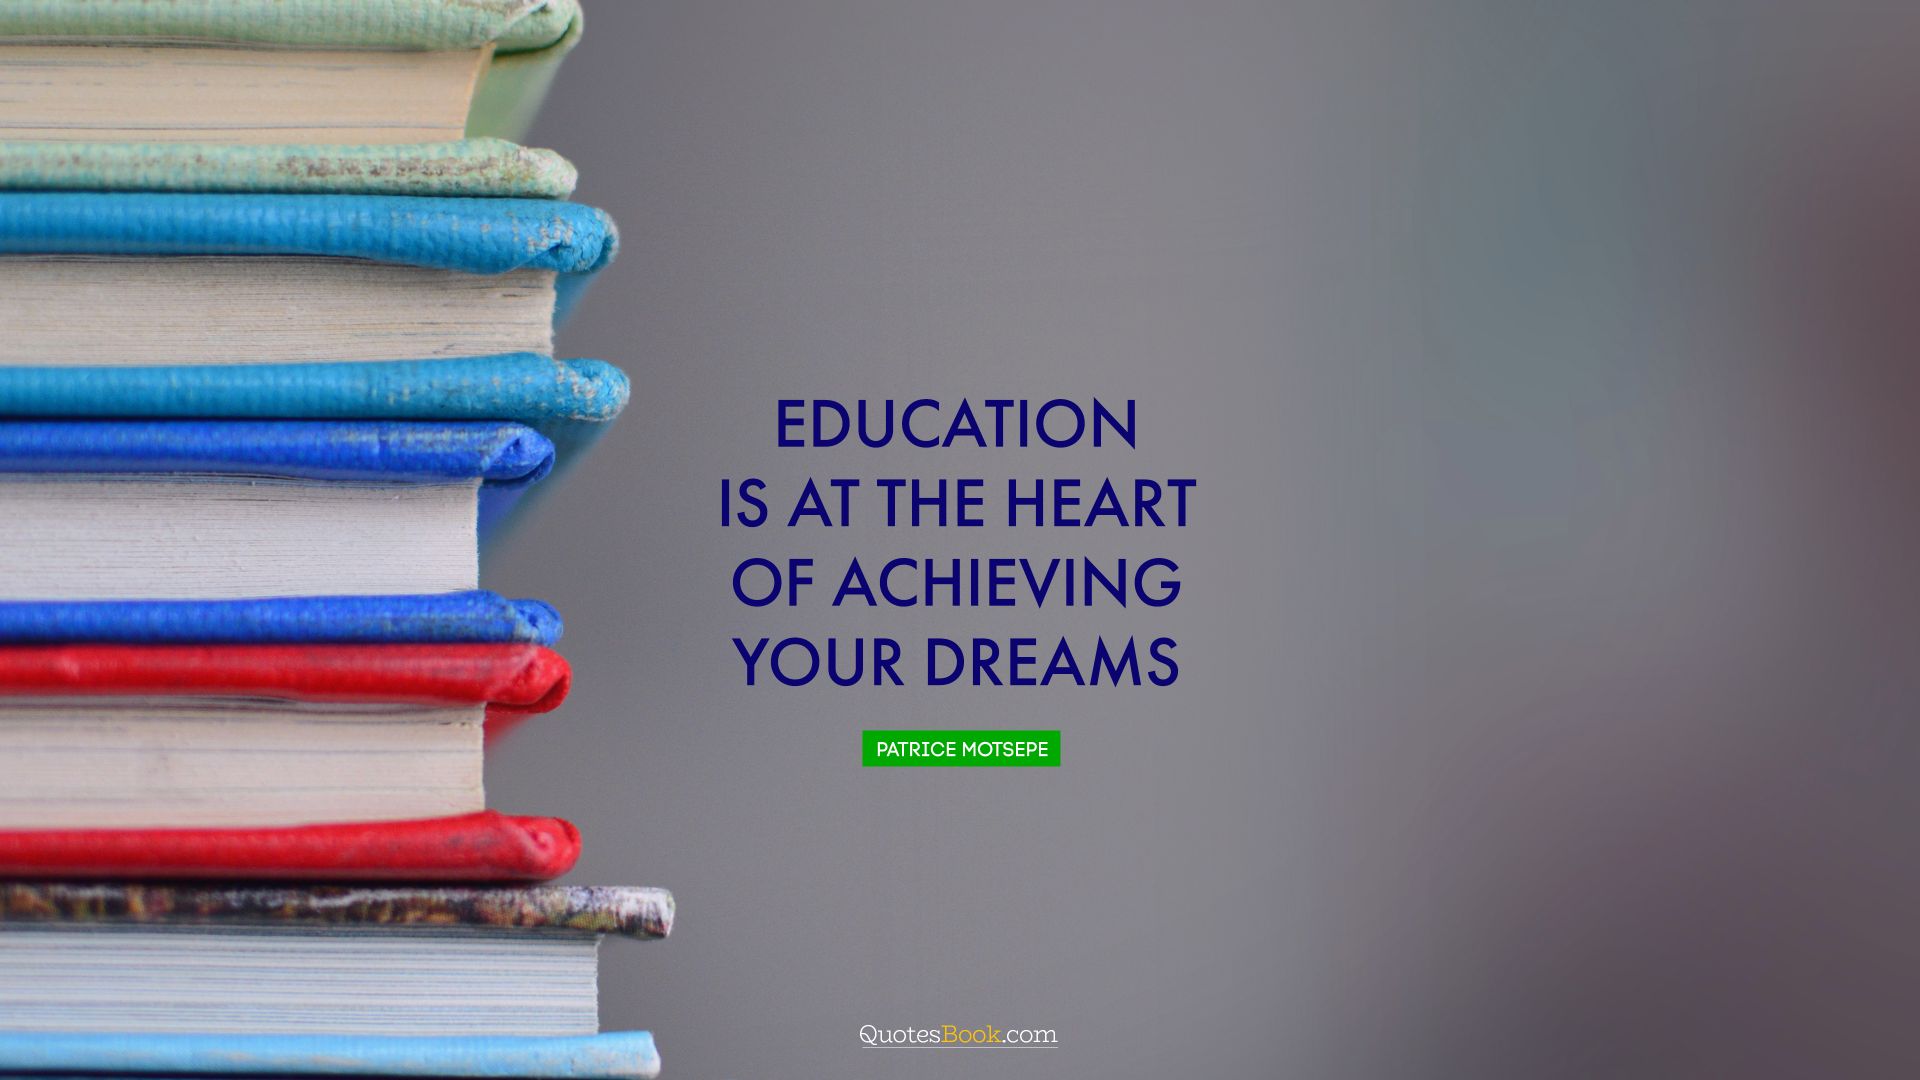 Education is at the heart of achieving your dreams. - Quote by Patrice Motsepe